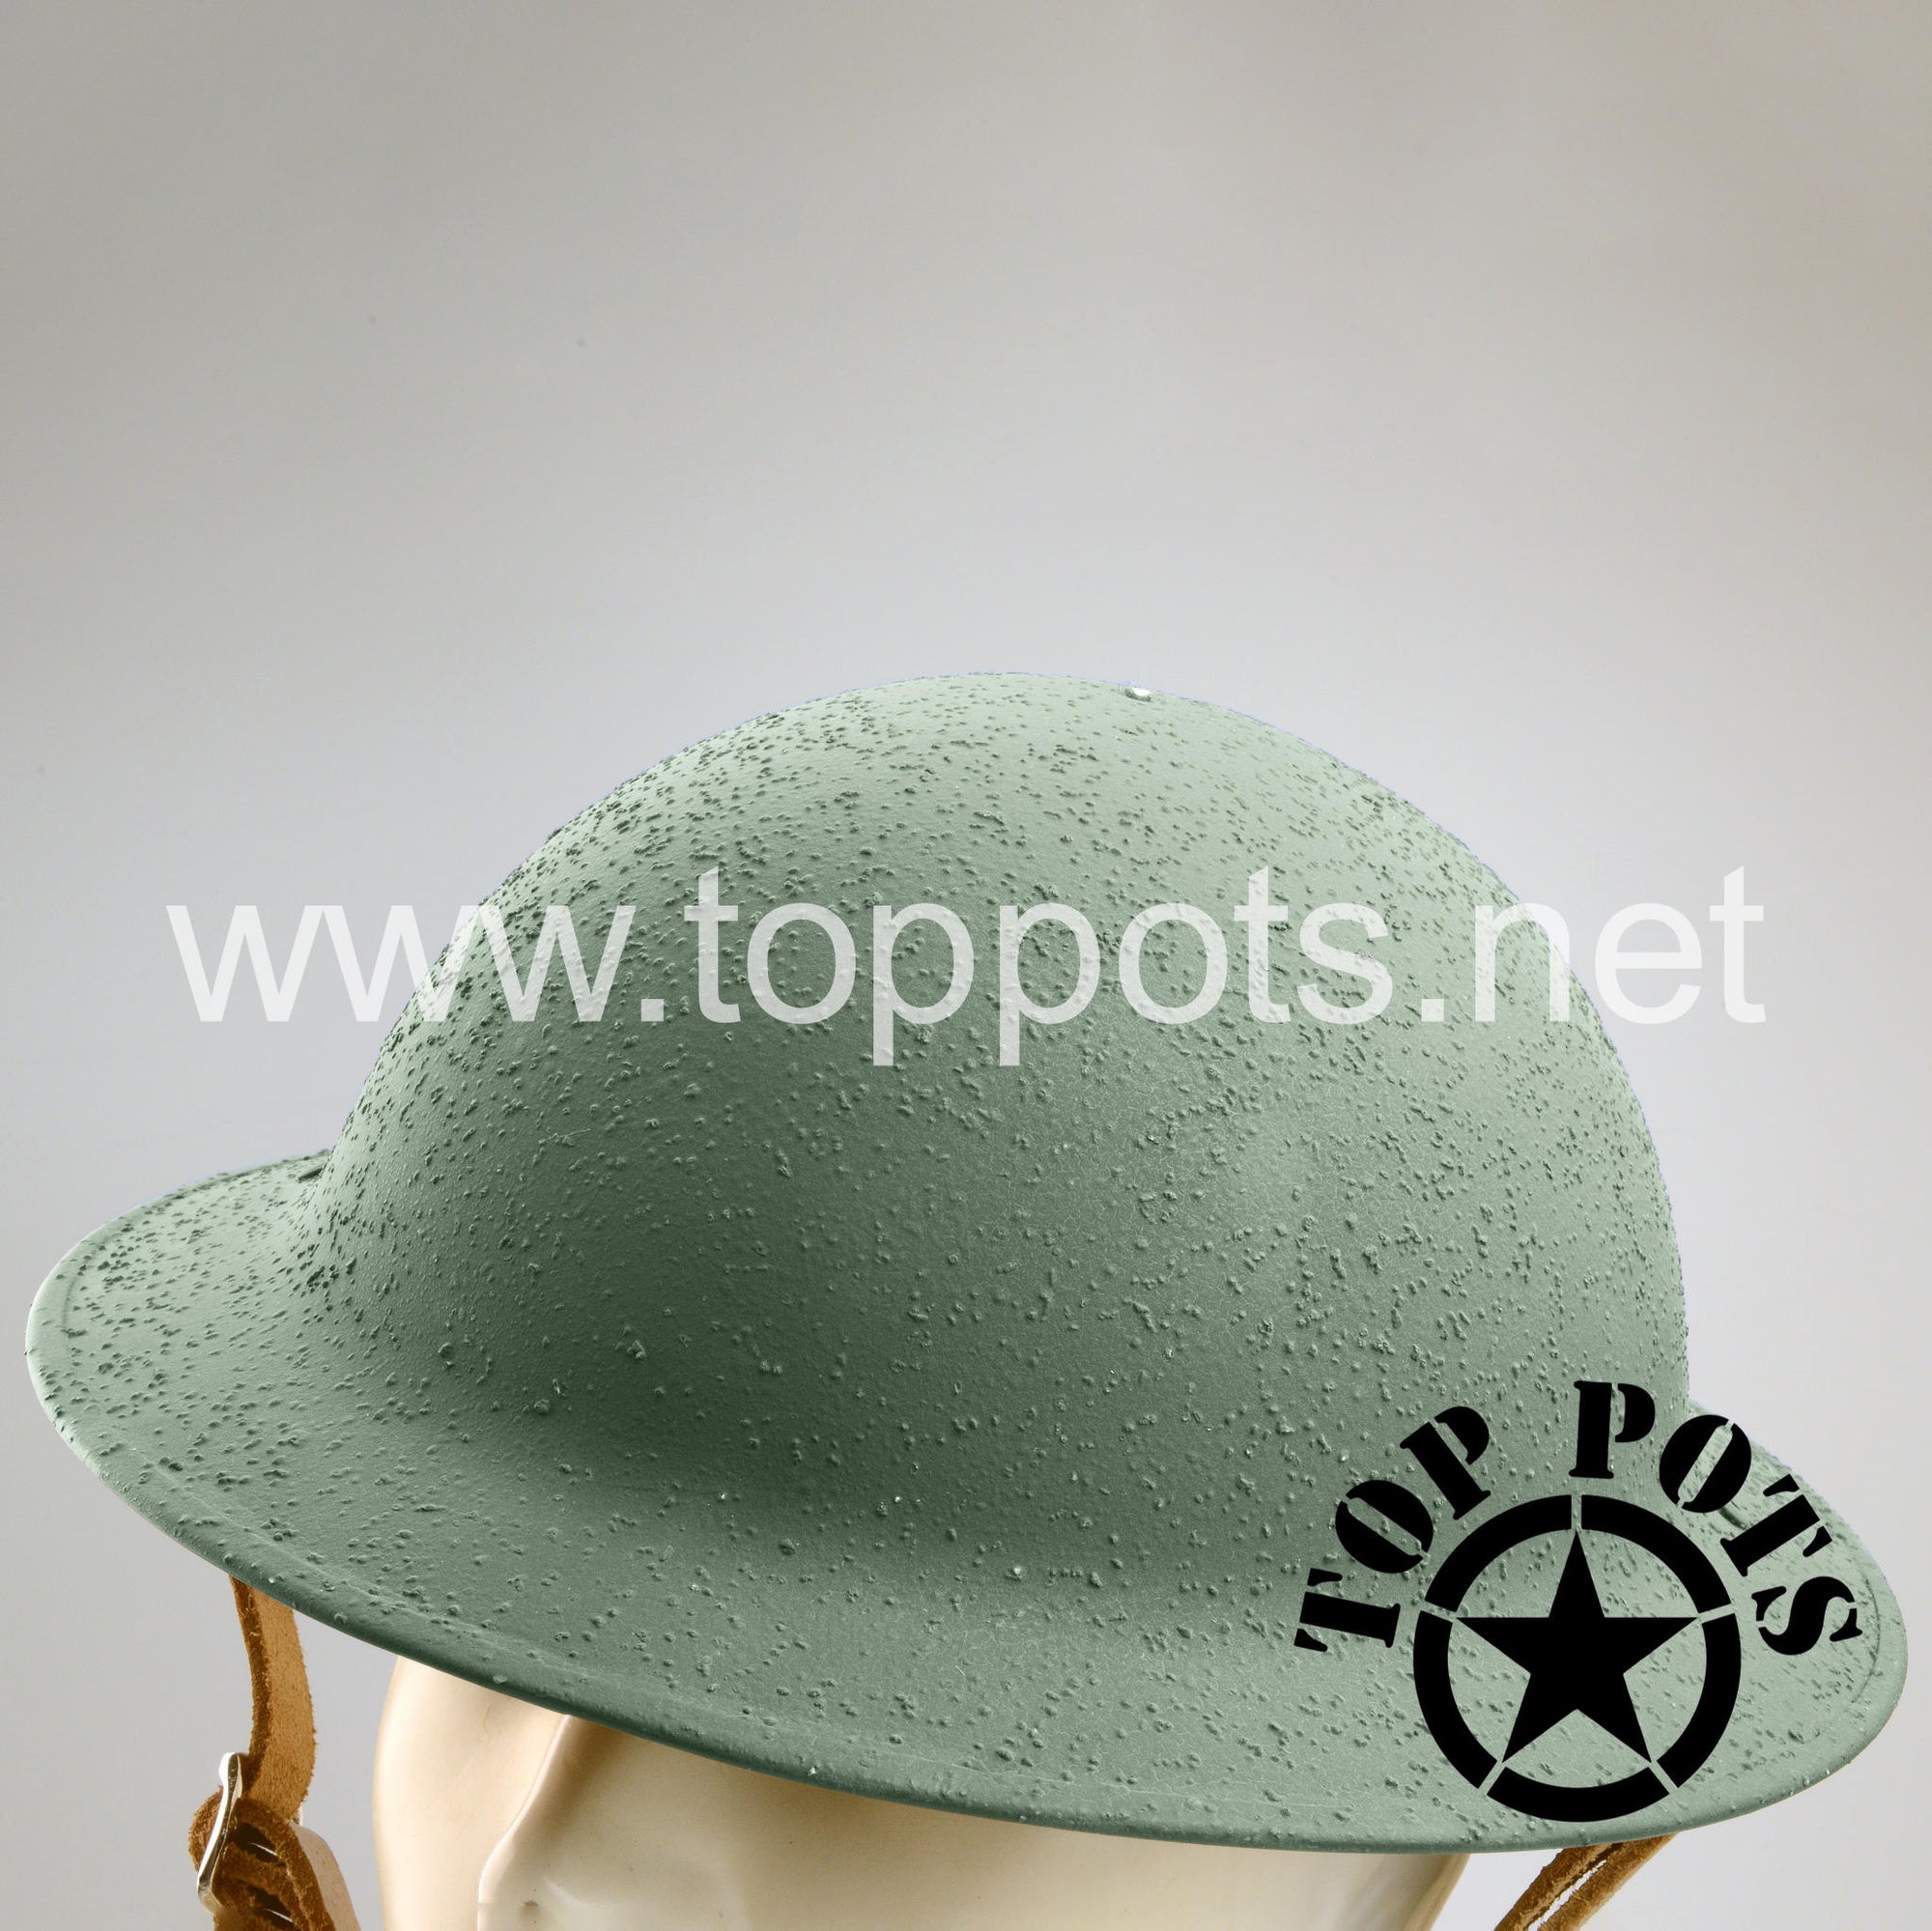 WWI British Army Reproduction M1916 MKI Enlisted Brodie Helmet with Burlap Cover – Textured Finish